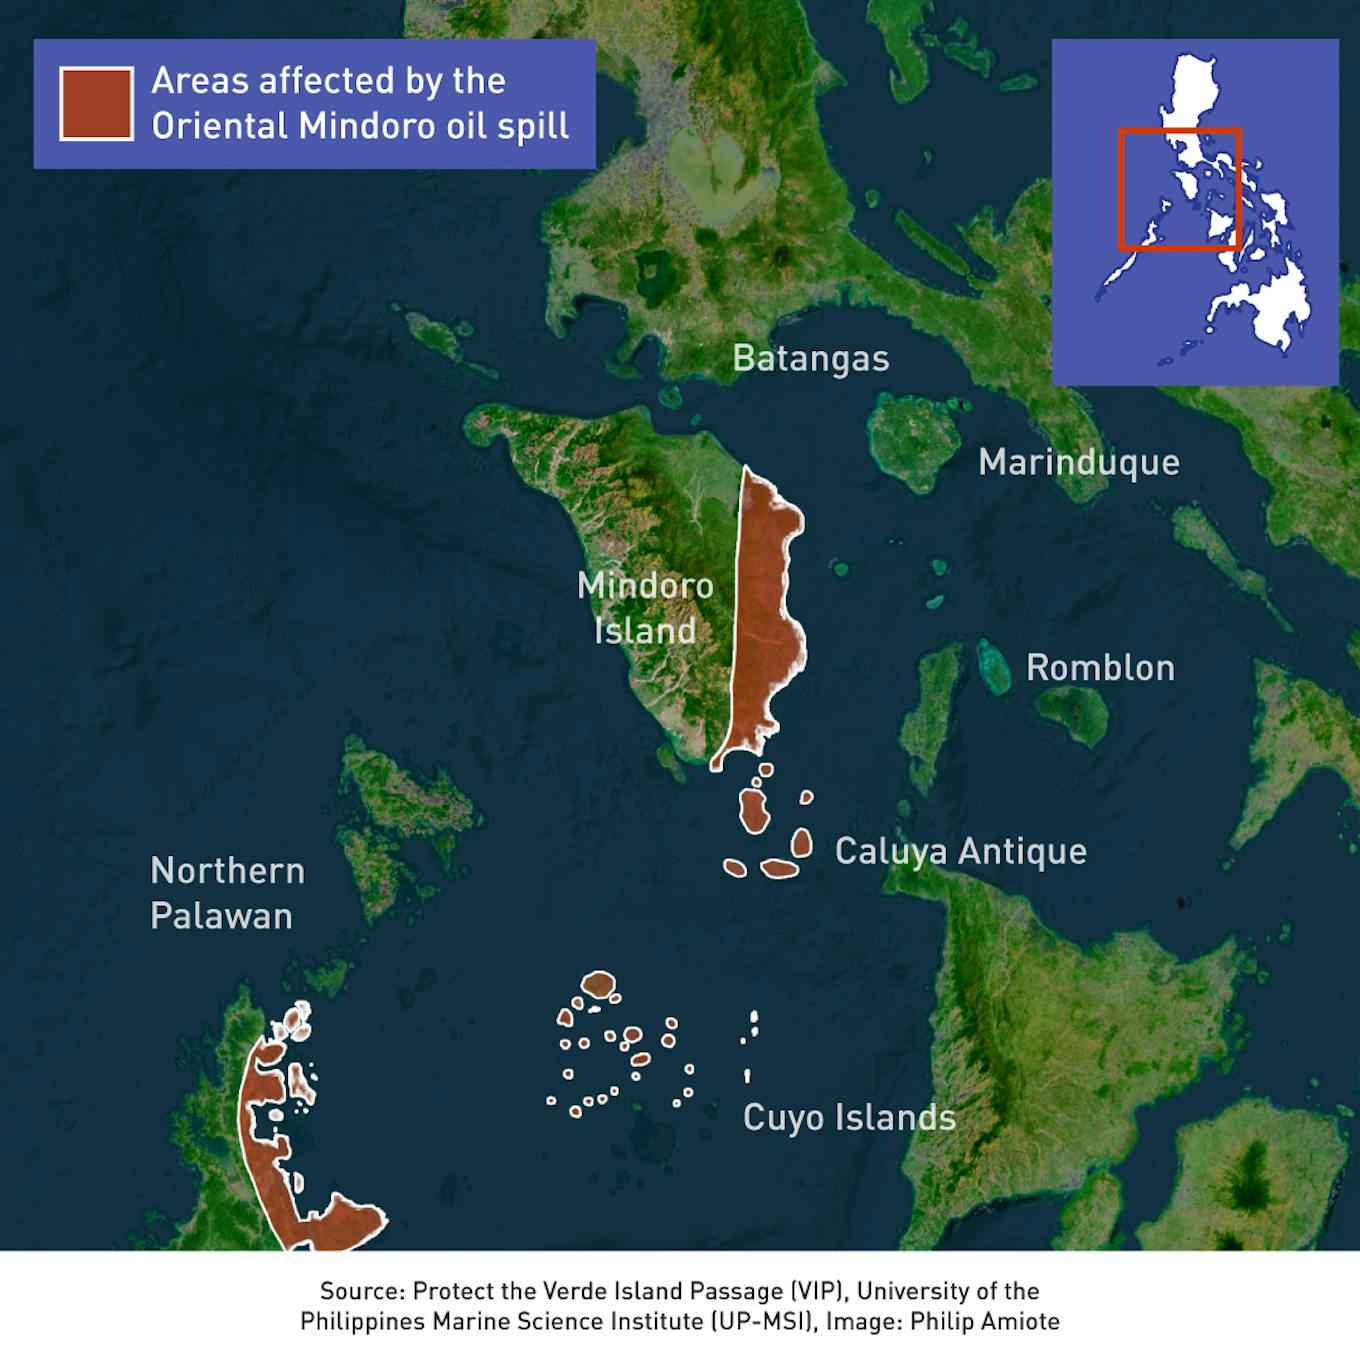 Areas affected by the Oriental Mindoro oil spill